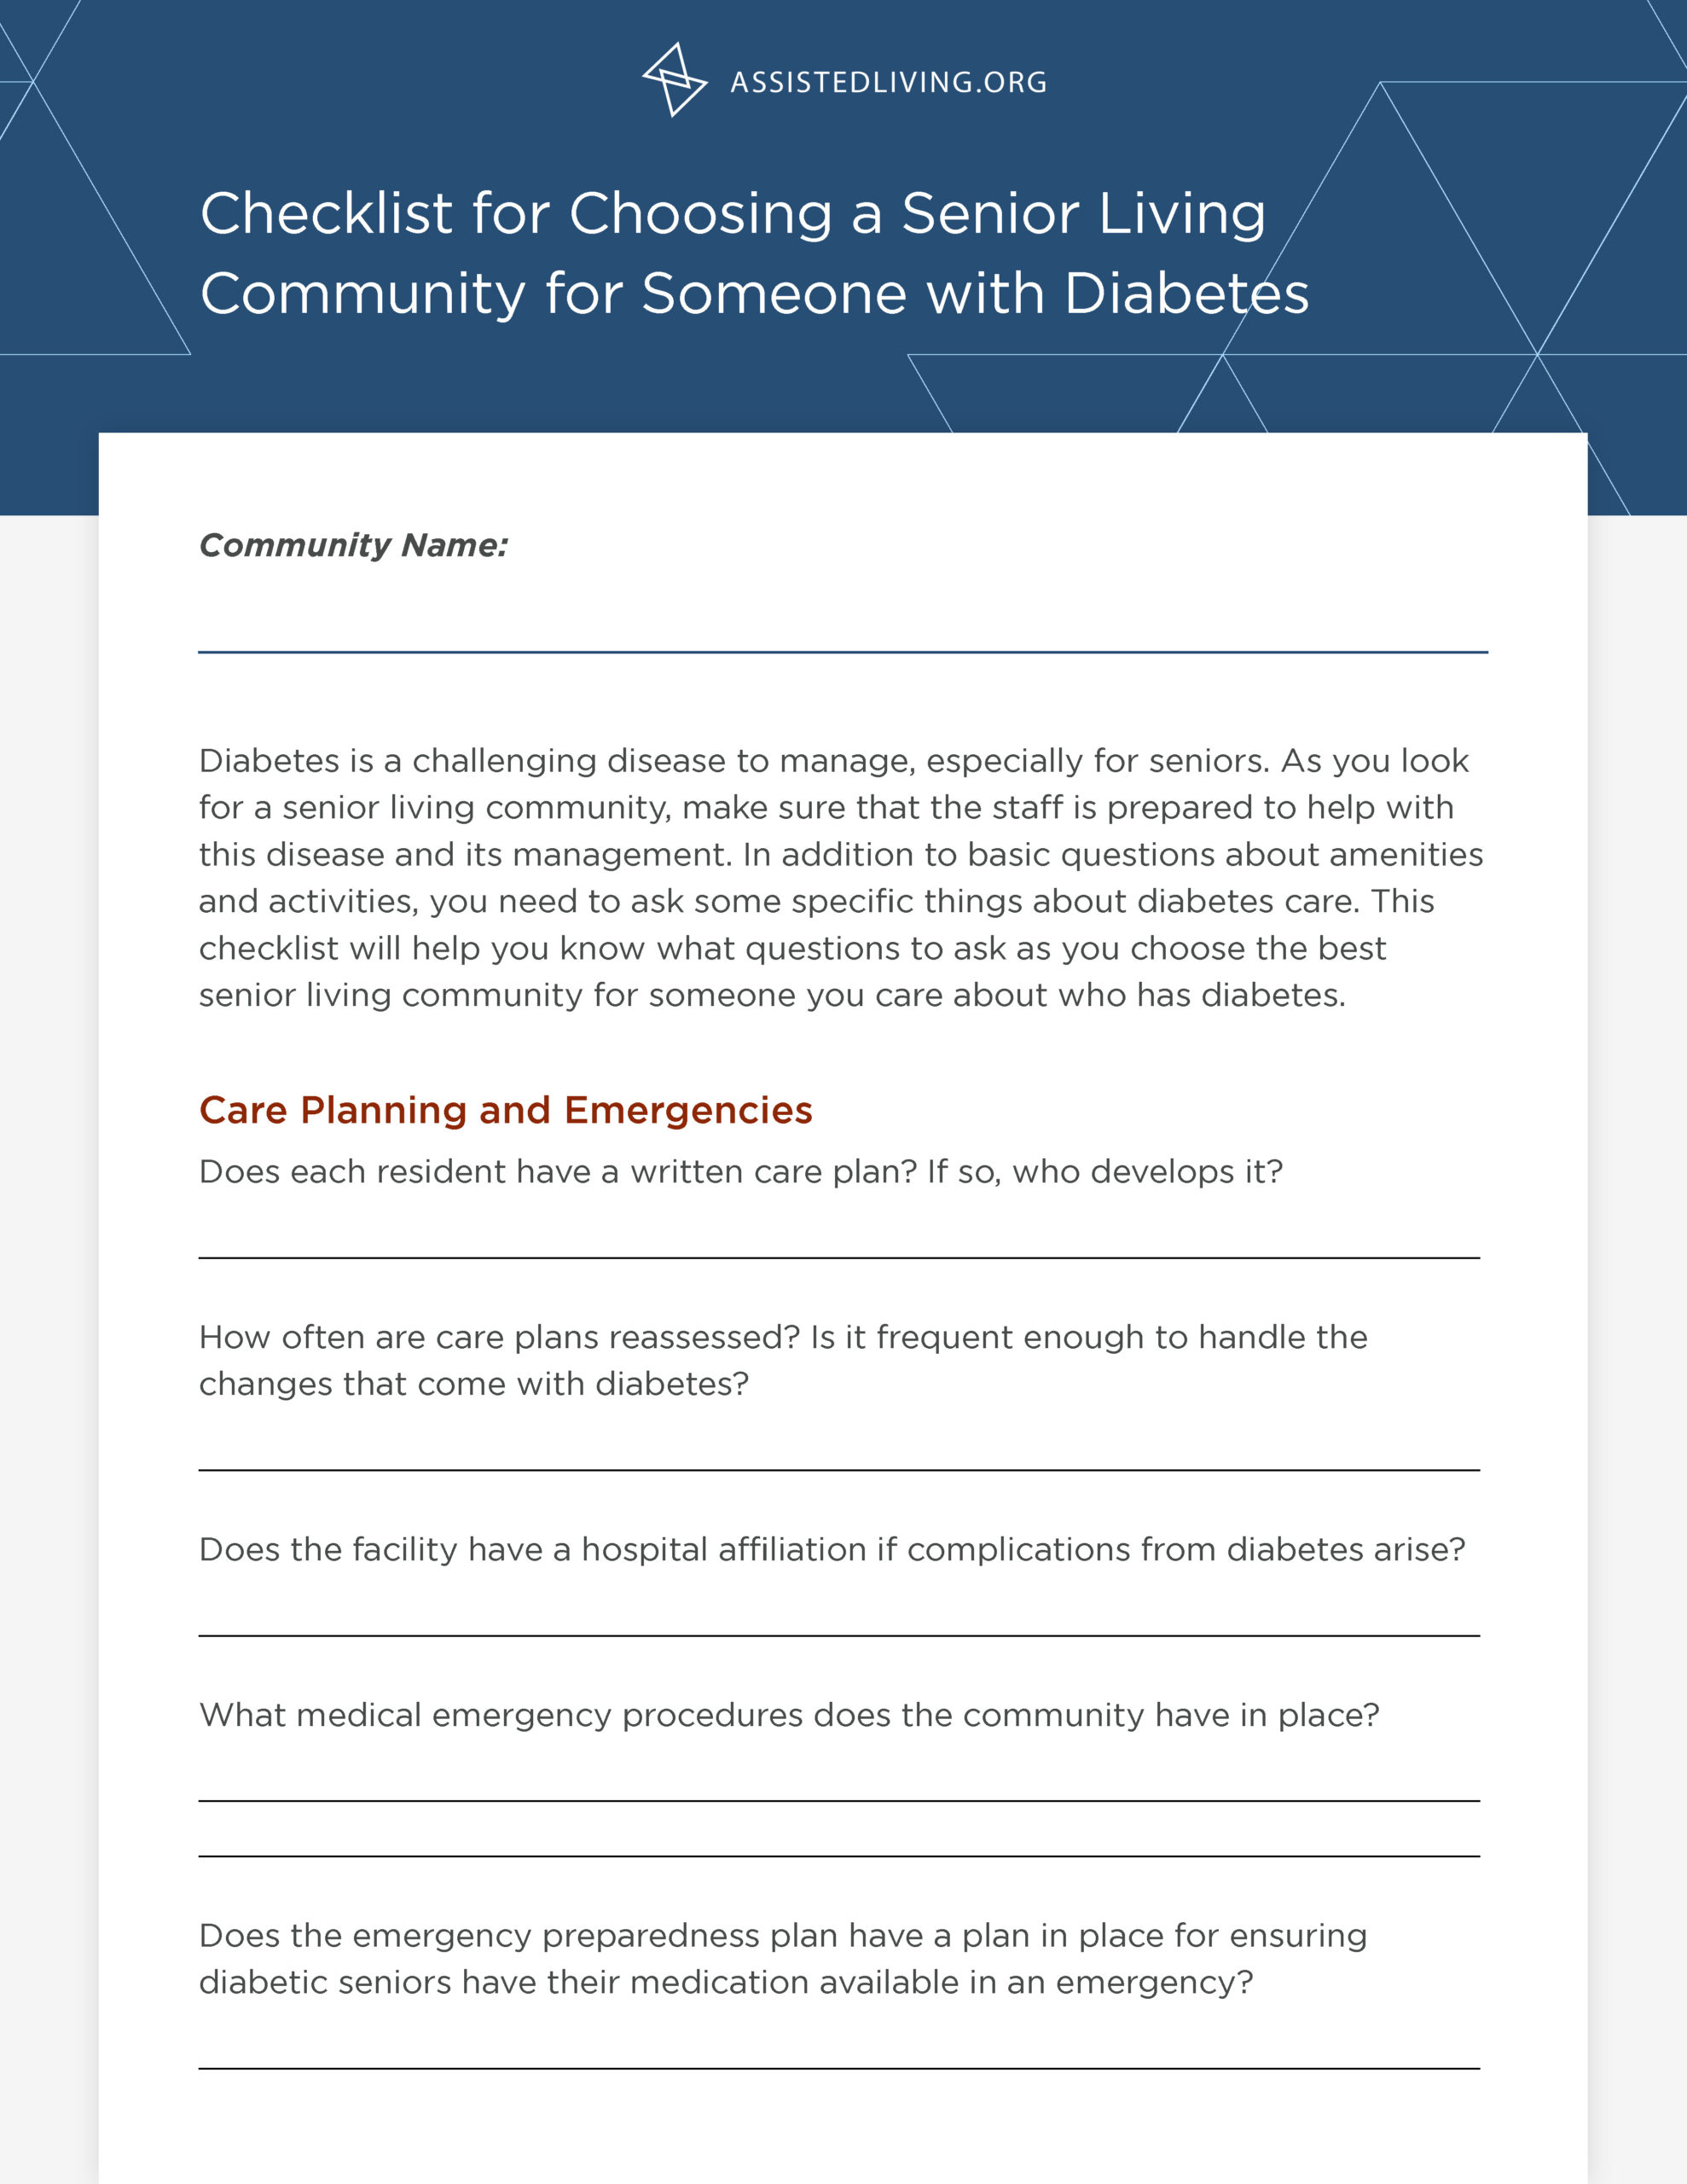 What to Look for When Finding a Senior Living Community for Someone With Diabetes